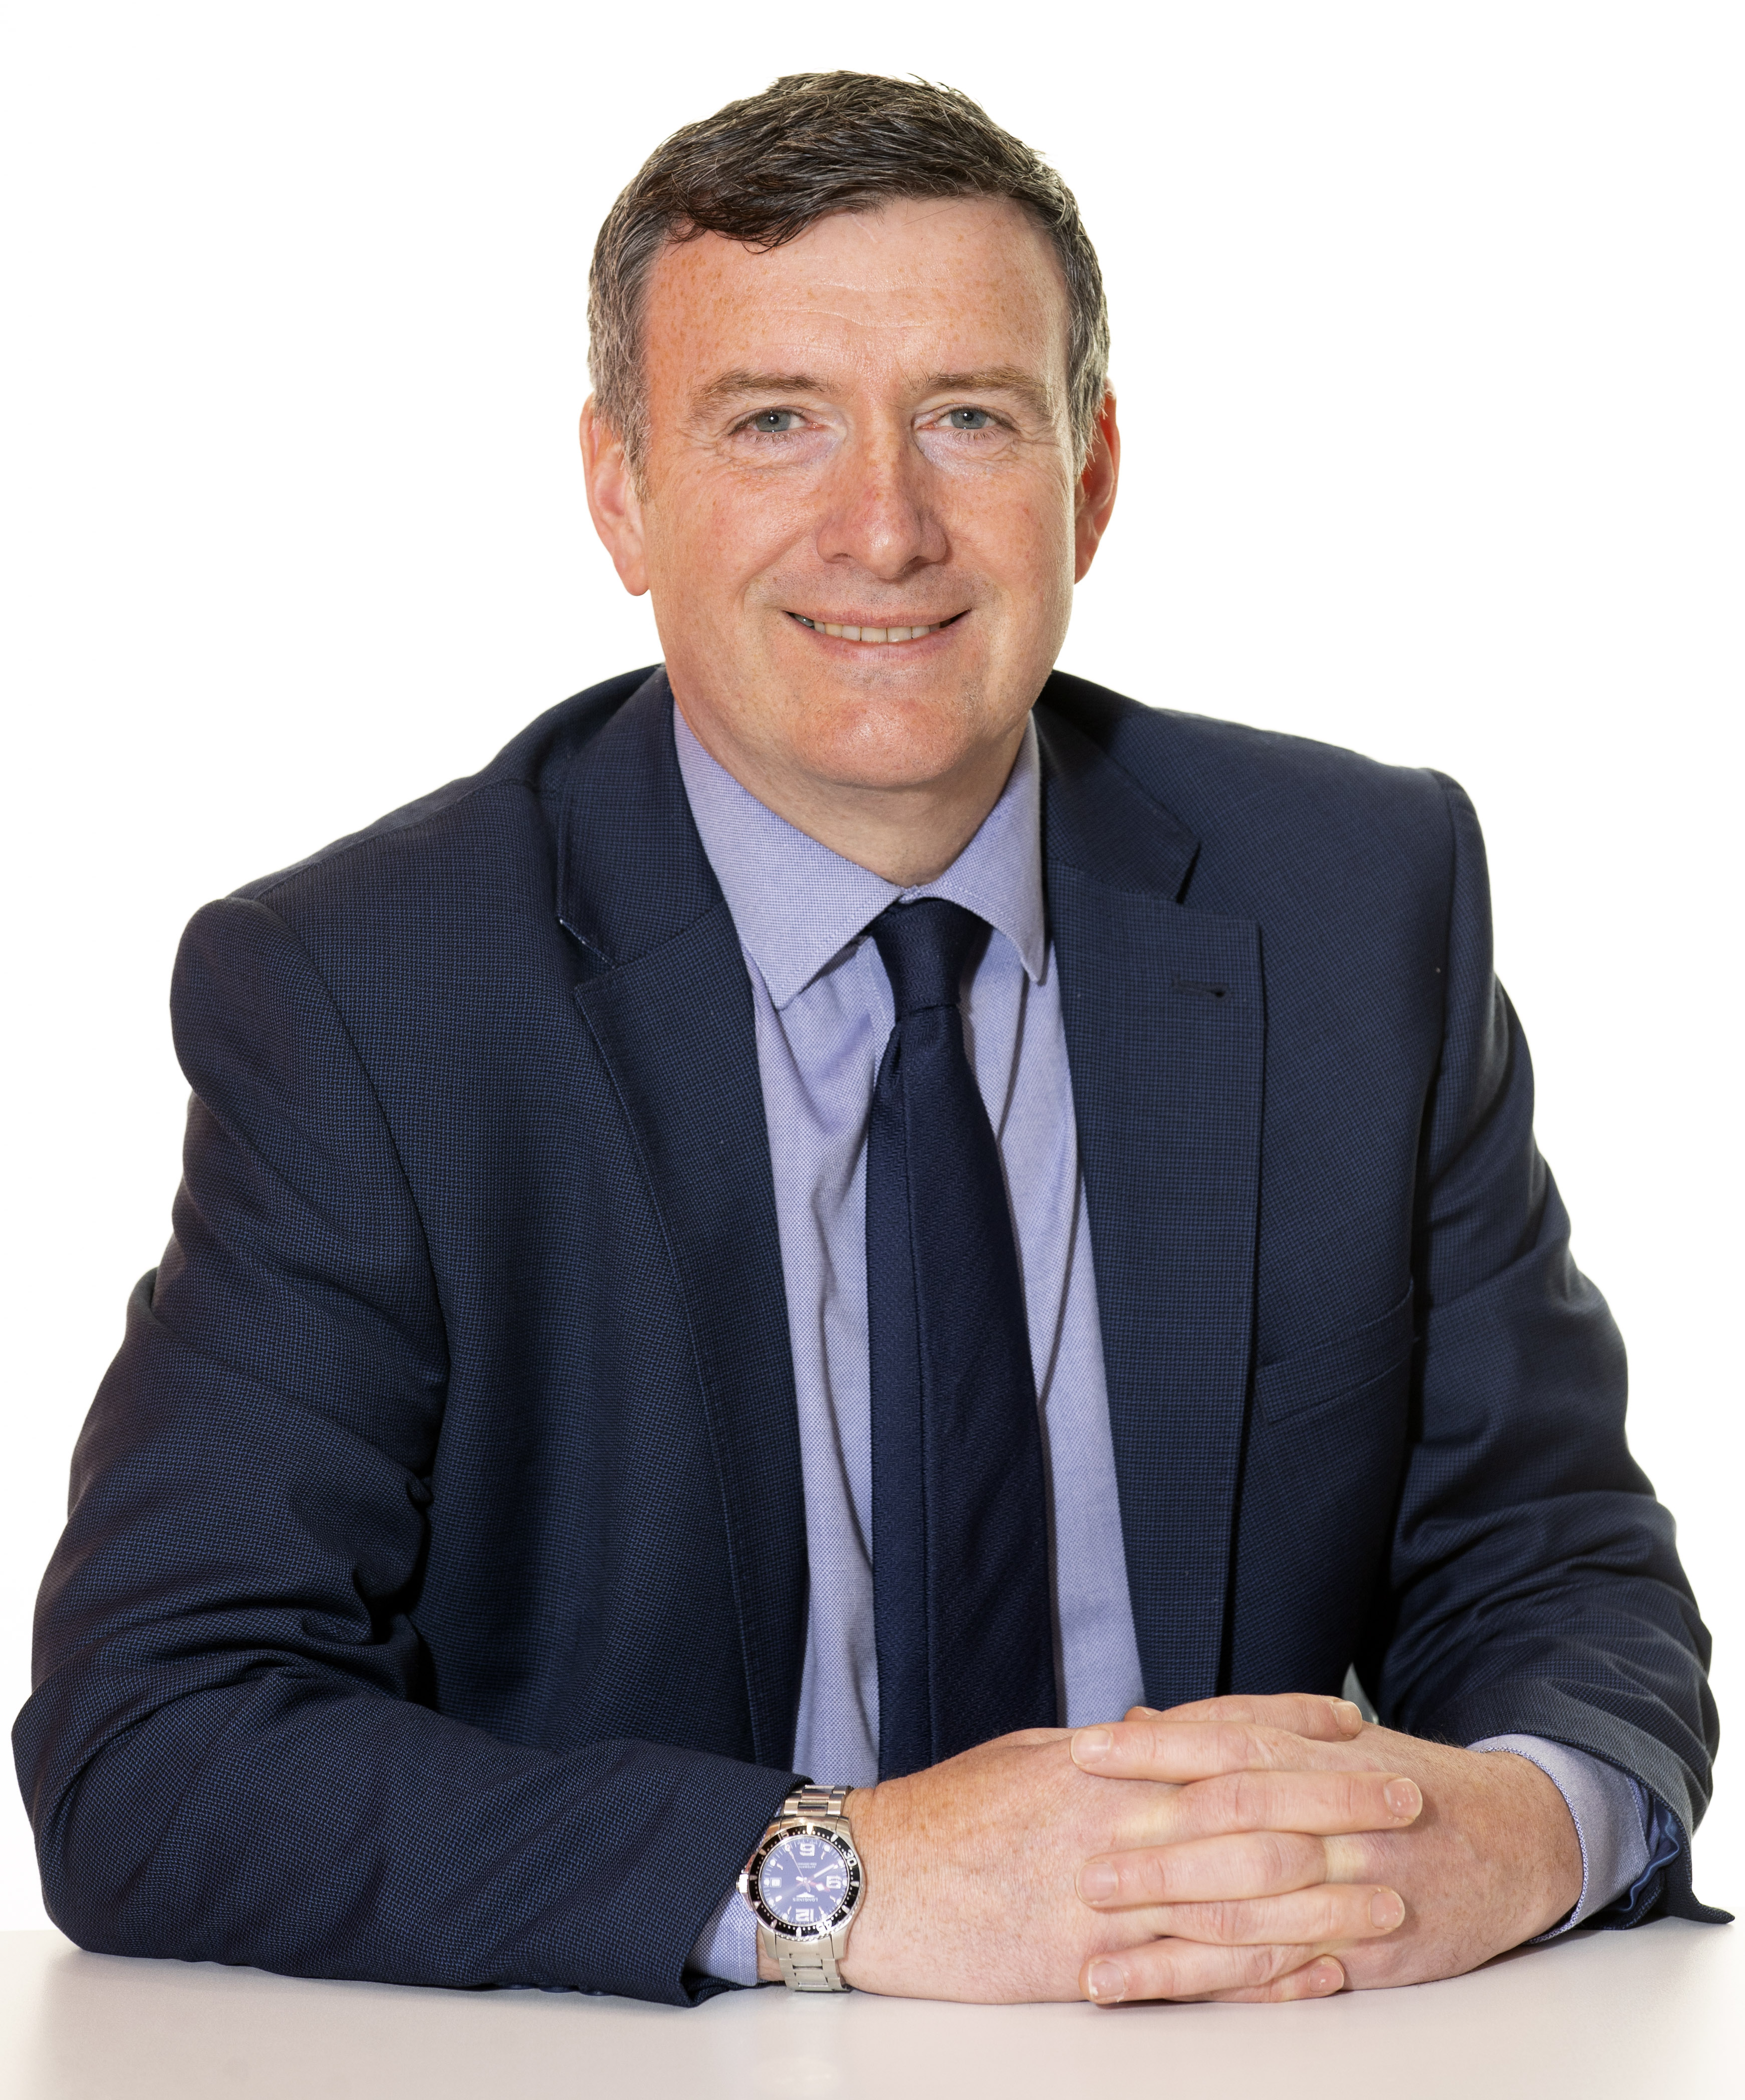 Wheatley Group appoints Frank McCafferty to assets and repairs role